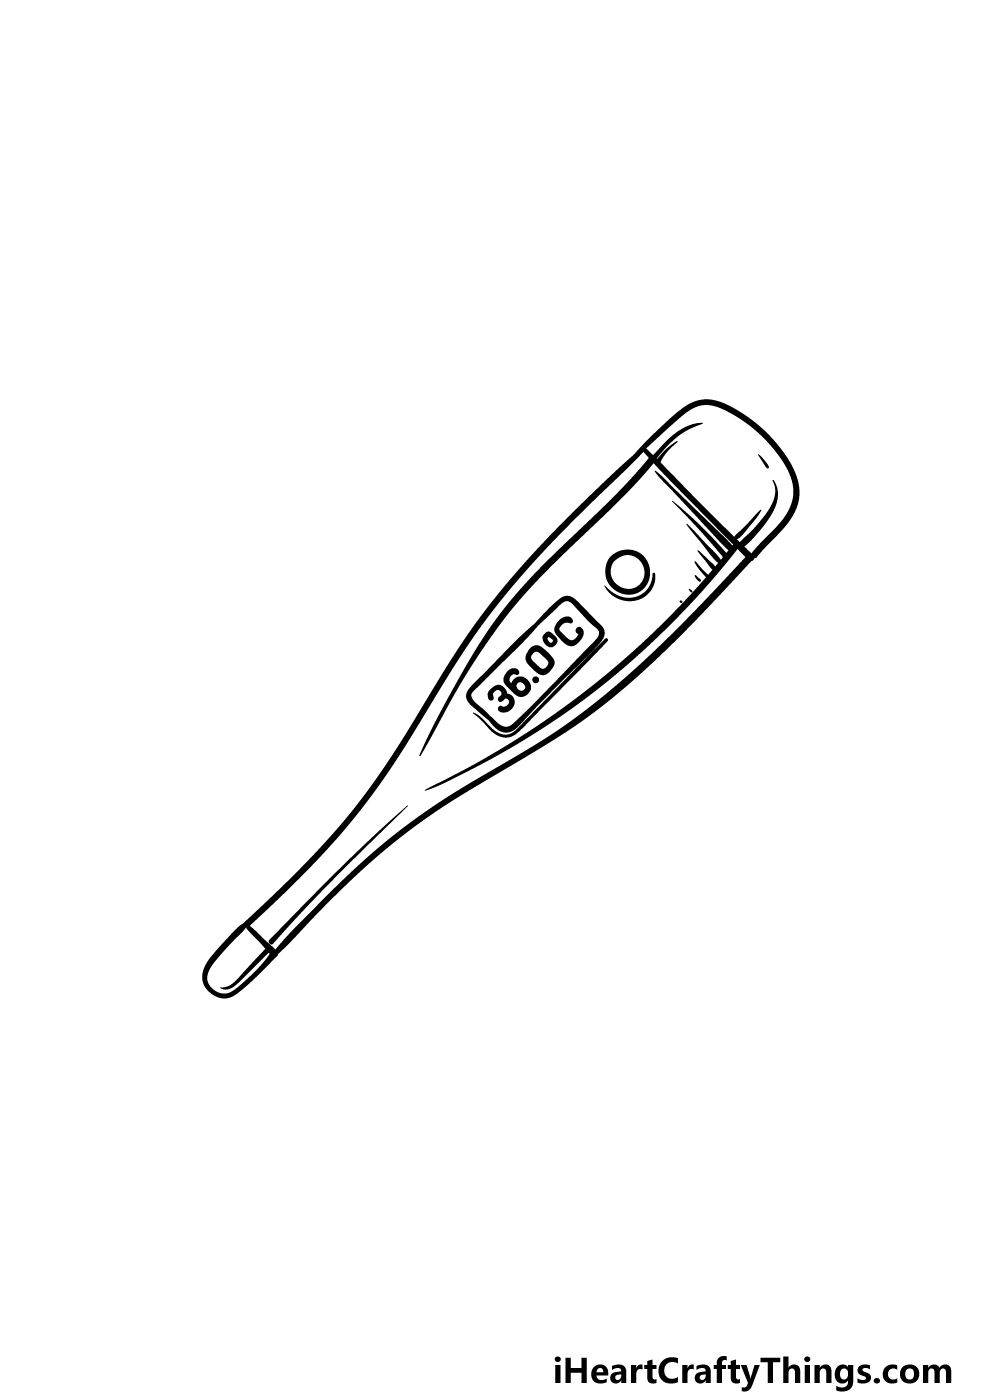 Thermometer Drawing - How To Draw A Thermometer Step By Step